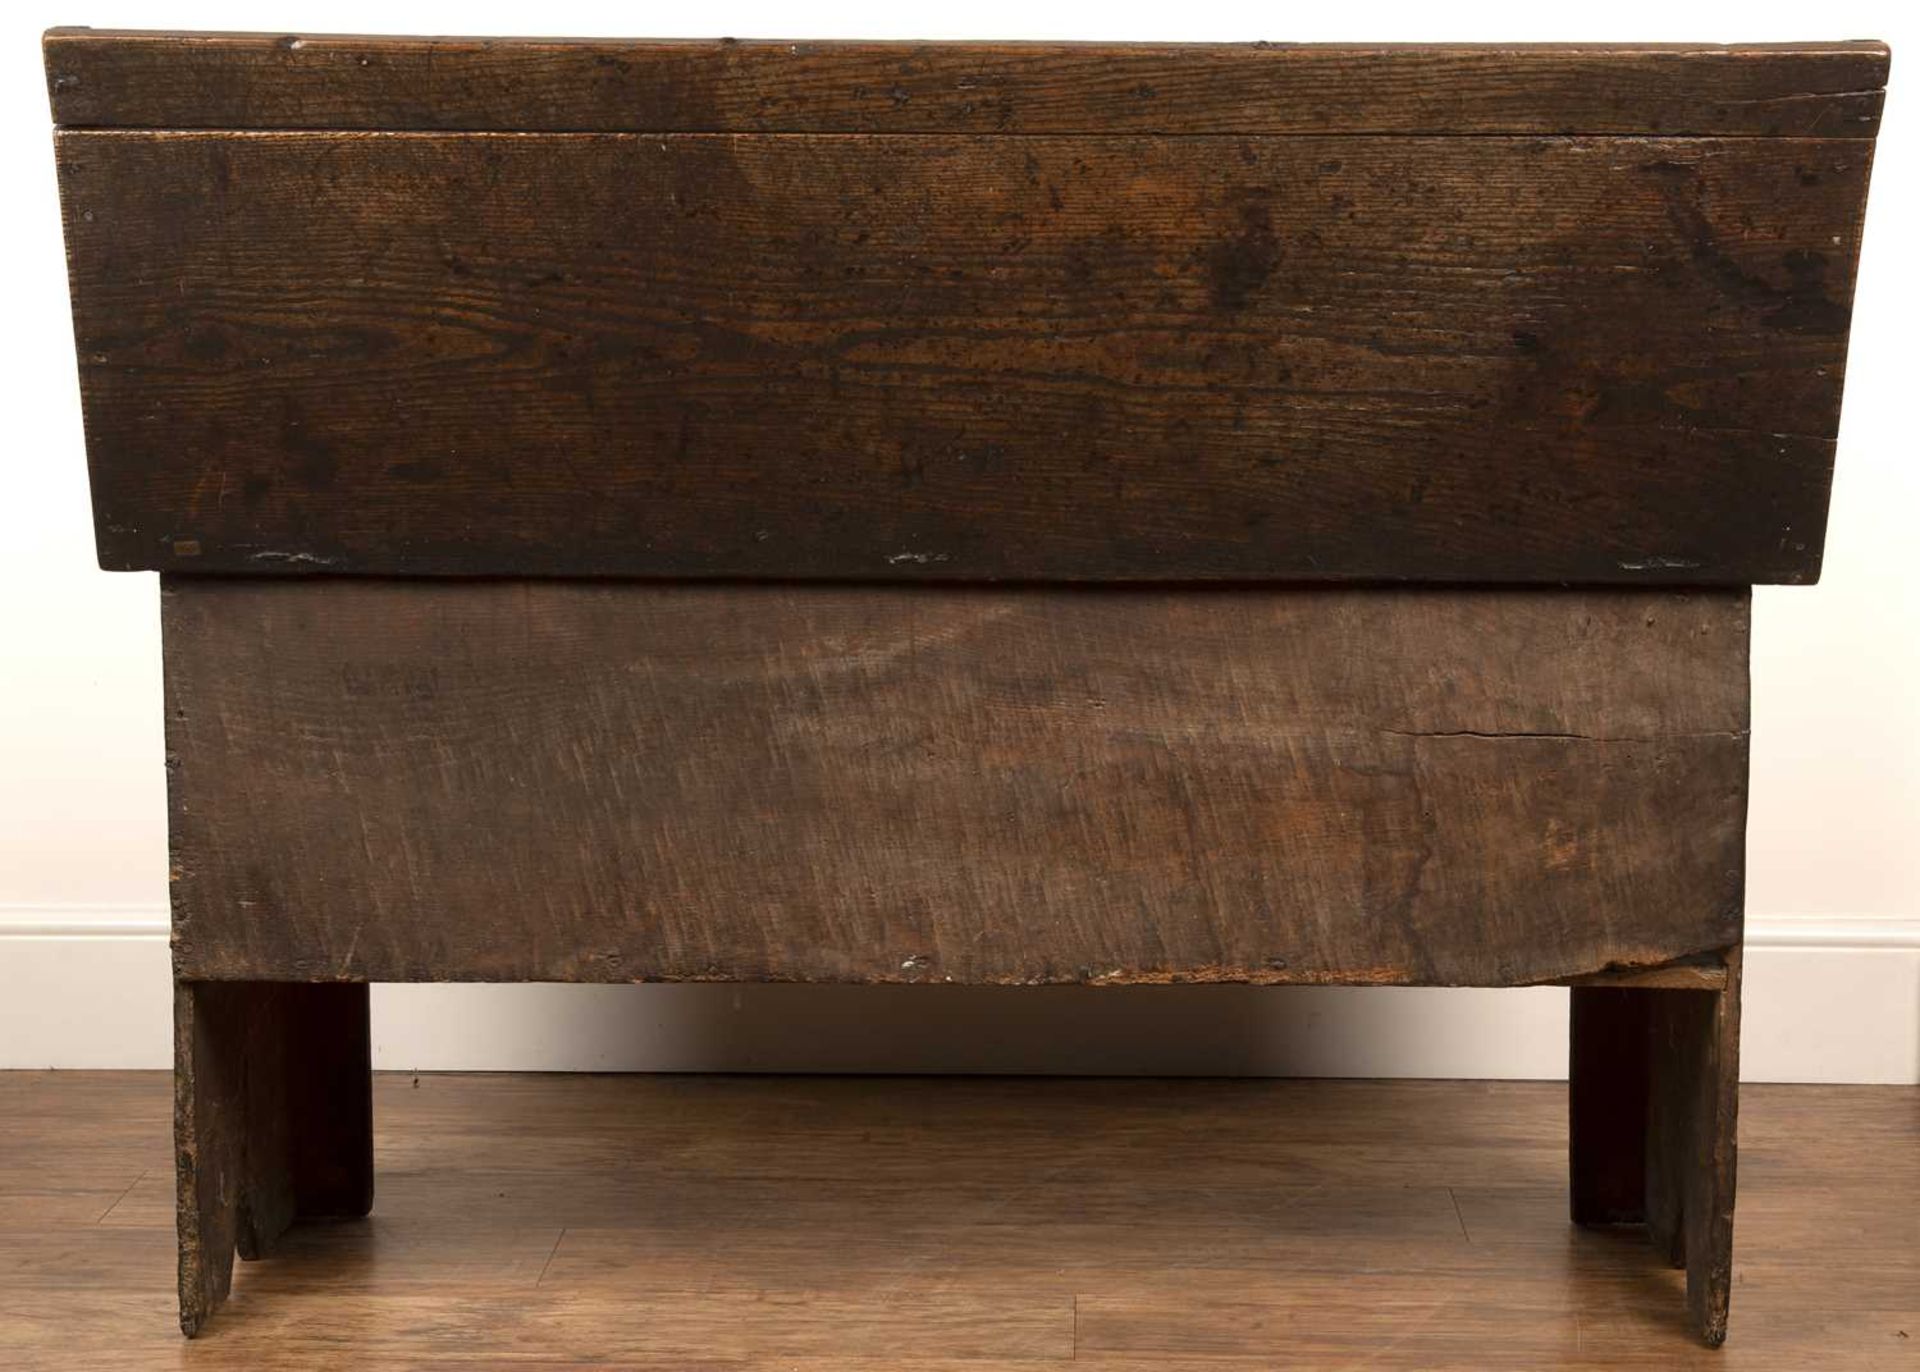 Oak coffer late 17th Century, with a plain double panel front and with iron hinges, 132.5cm wide x - Image 5 of 5